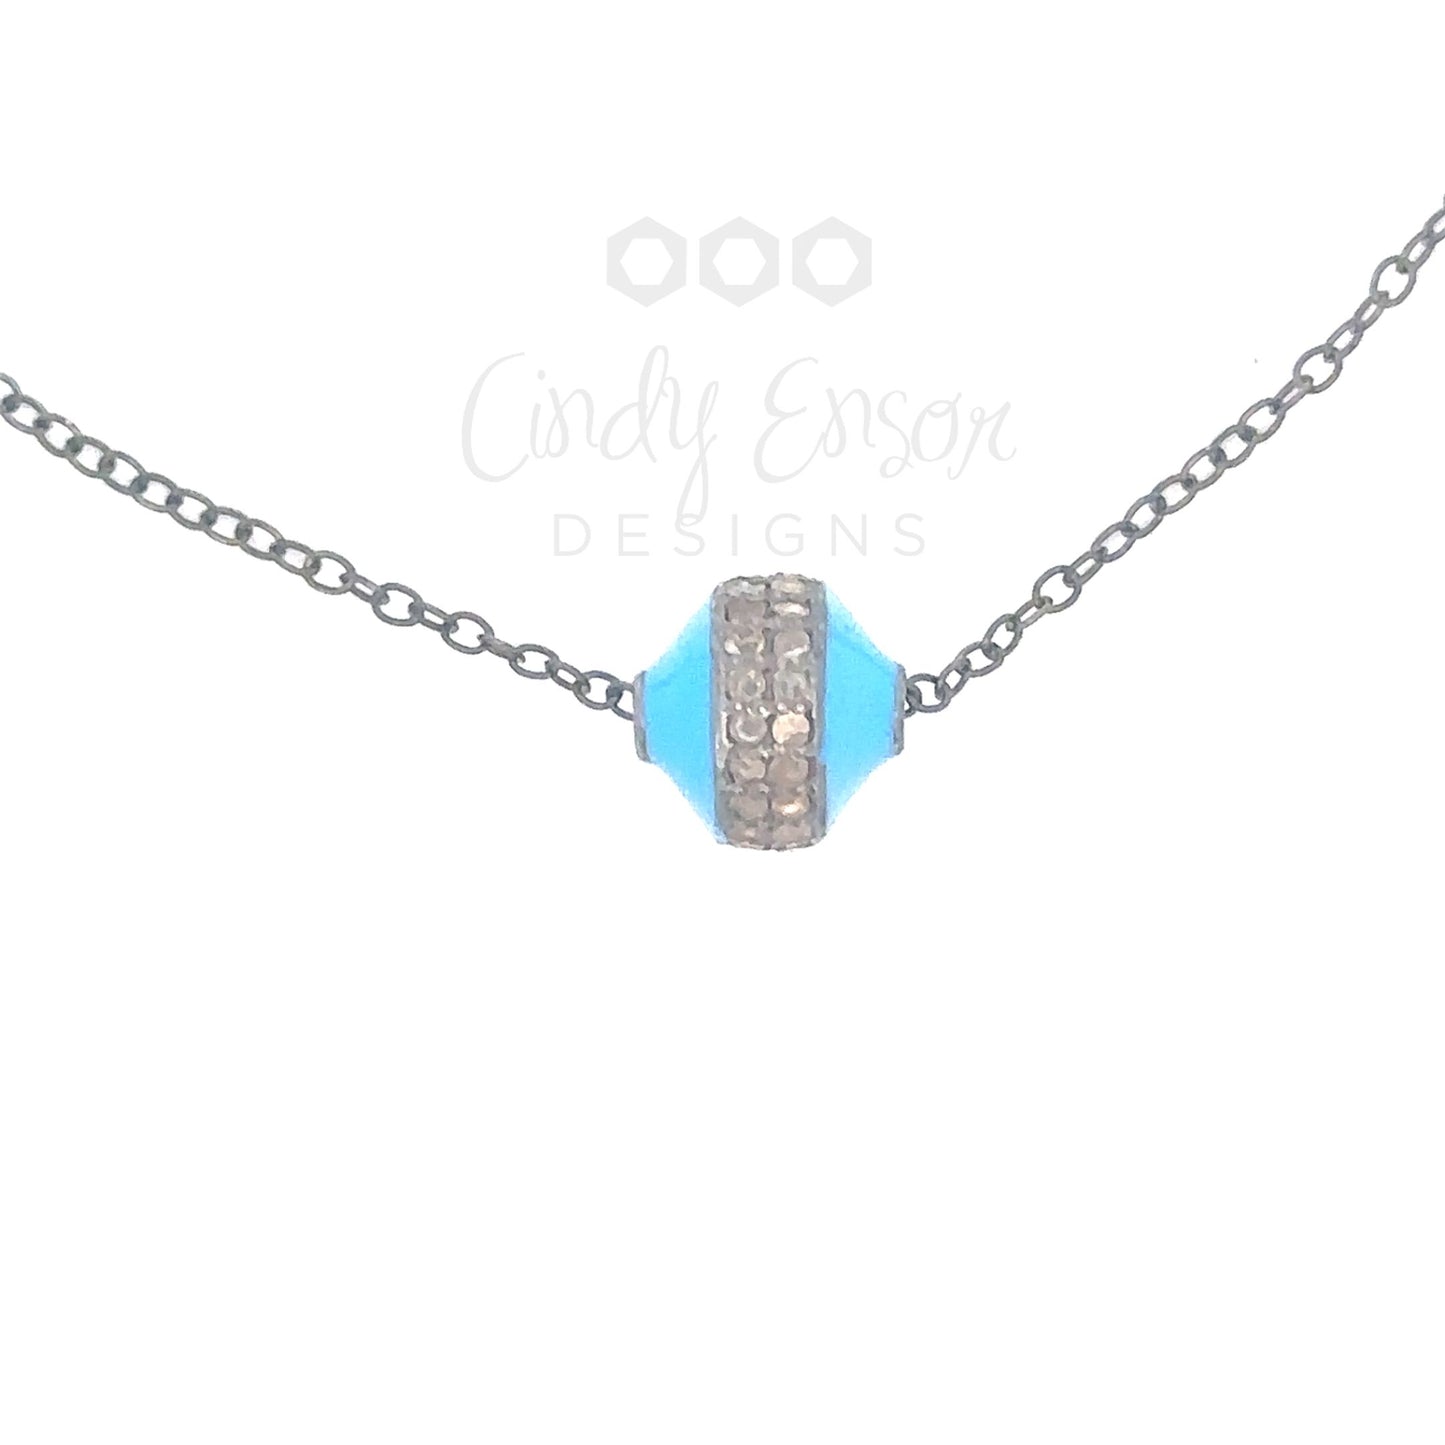 8mm Enamel and Pave Diamond Bead Necklace